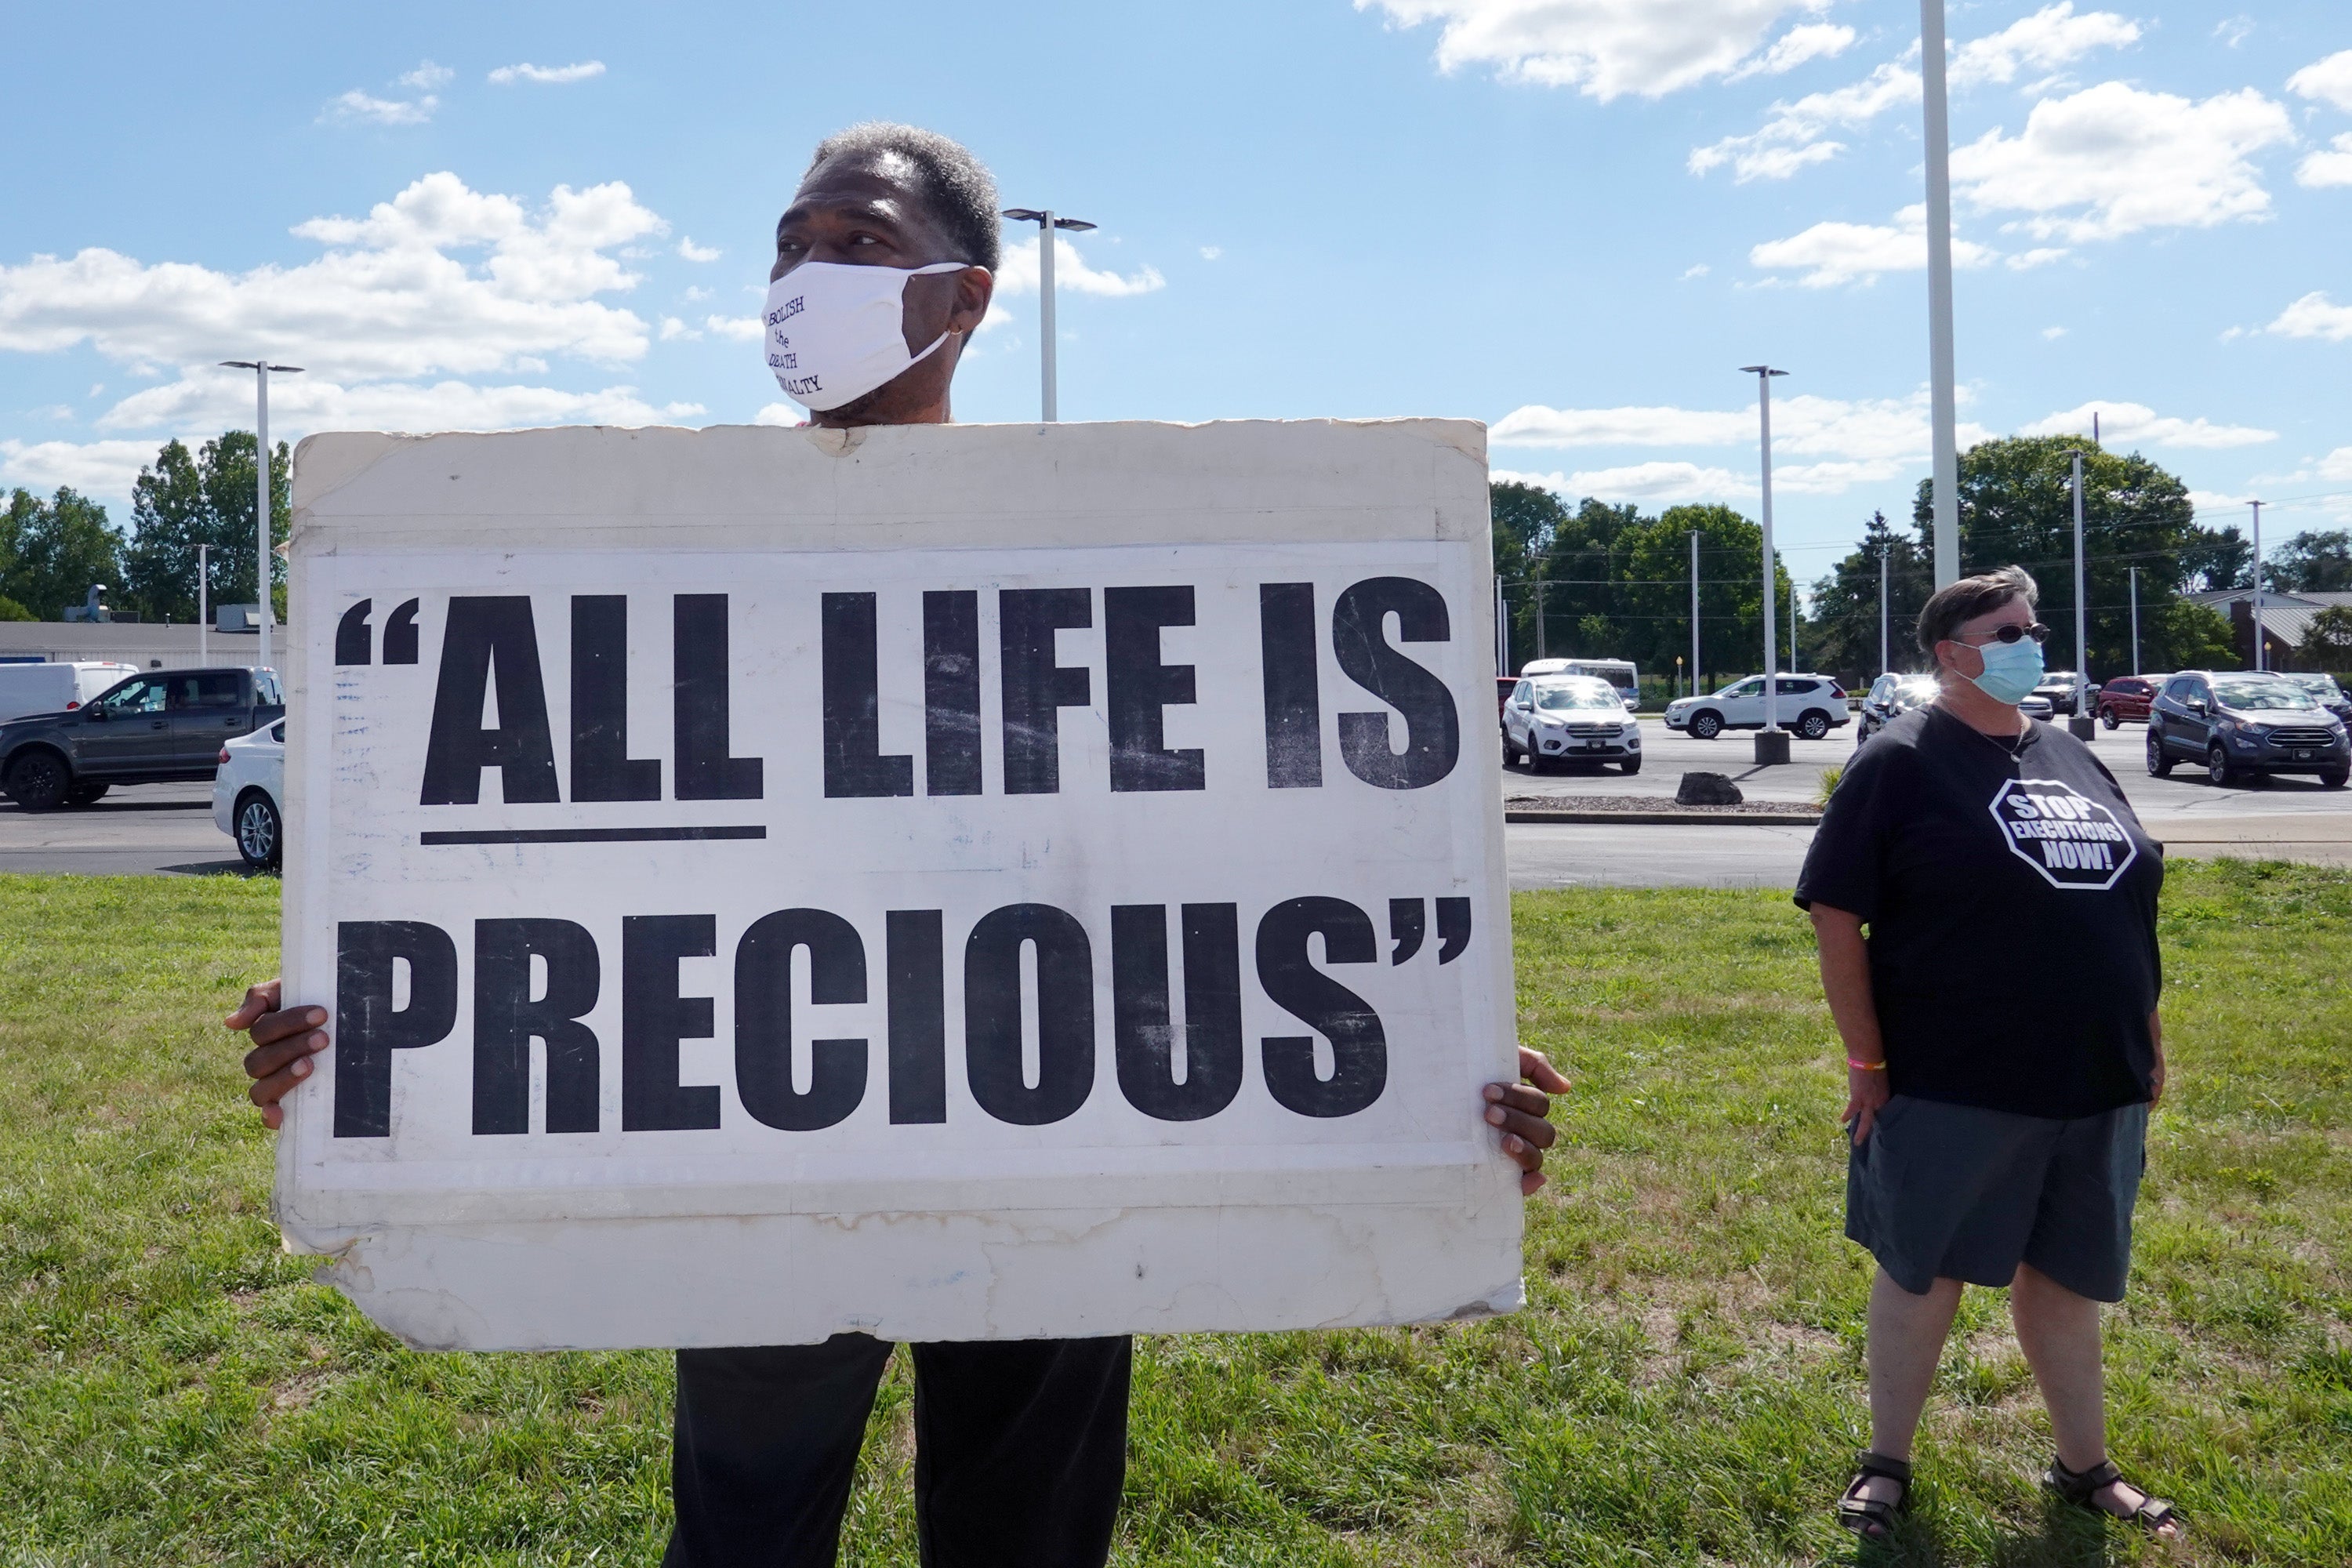 Sylvester Edwards expresses his opposition to the death penalty during a protest near the Federal Correctional Complex where Daniel Lewis Lee was scheduled to be executed on July 13, 2020 in Terre Haute, Indiana. (Photo by Scott Olson/Getty Images)